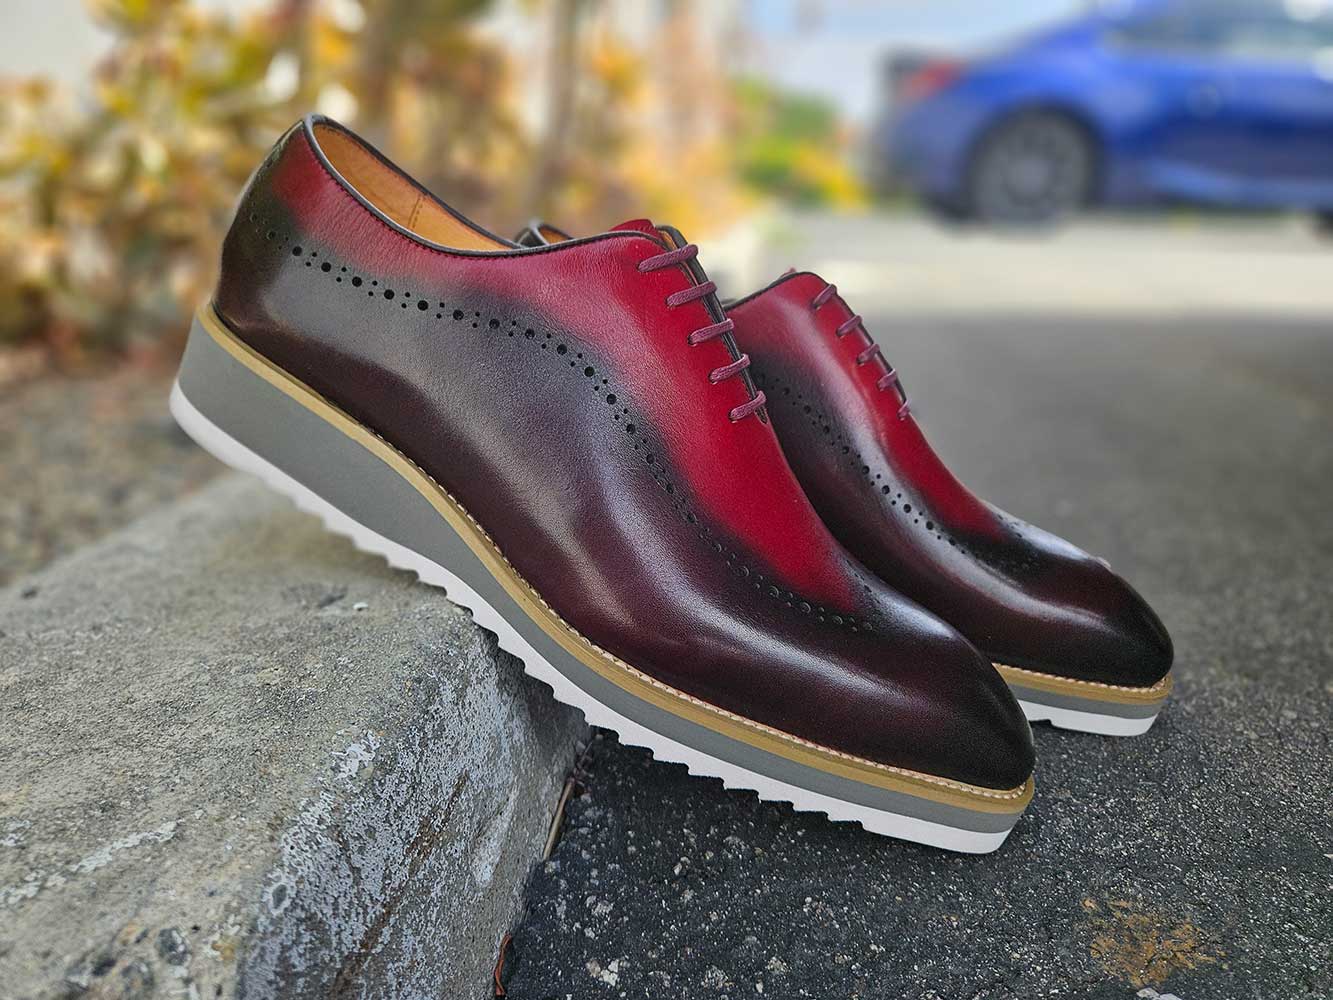 Two Tone Oxford With Lightweight Sole